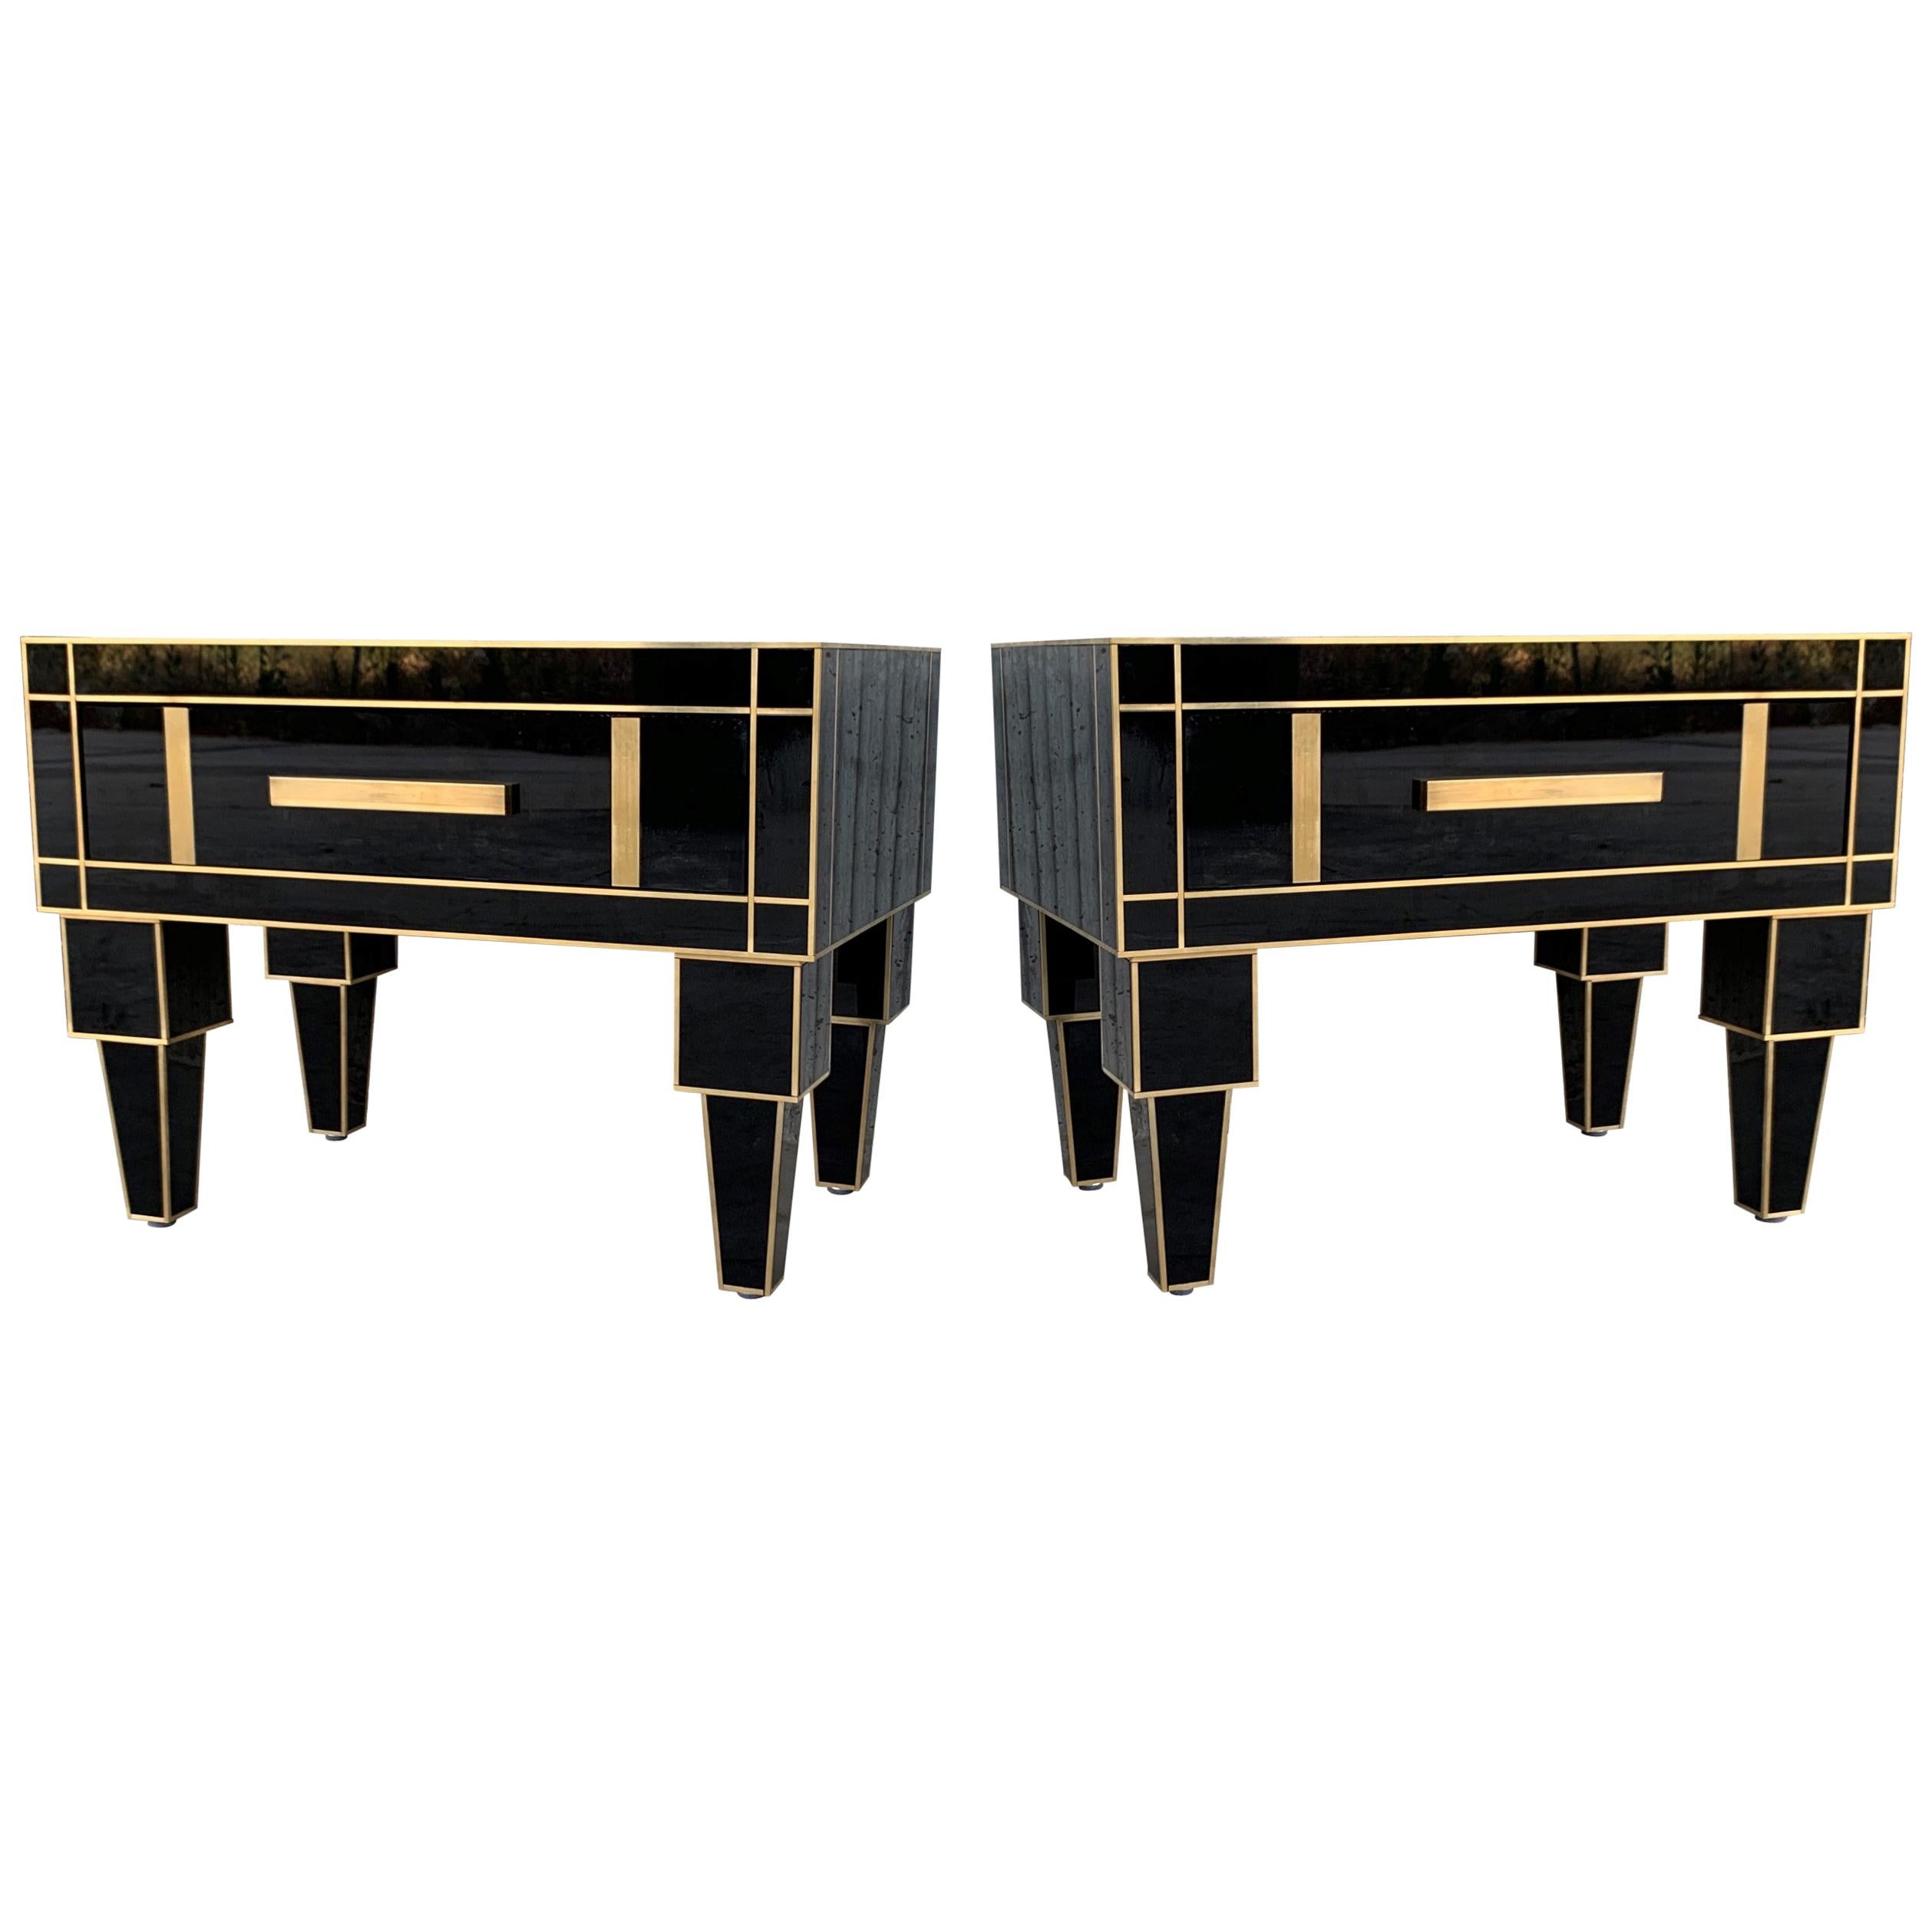 New Pair of Mirrored Low Nightstand in Black Mirror and Chrome with Drawer